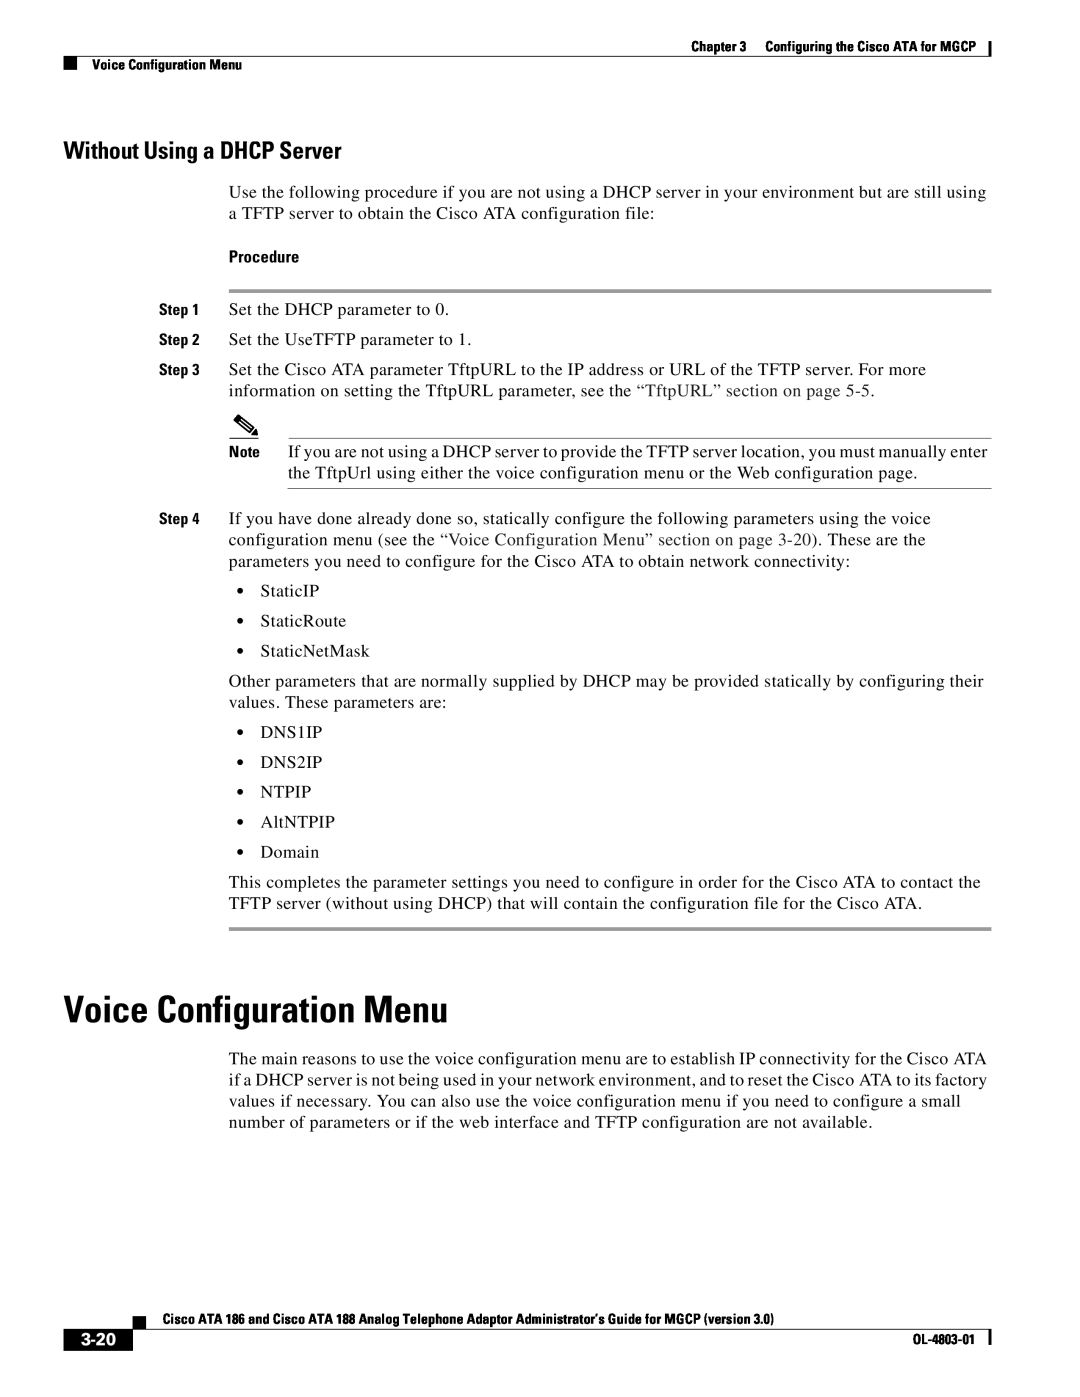 Cisco Systems ATA 186, ATA 188 manual Voice Configuration Menu, Without Using a DHCP Server, 3-20, Procedure 